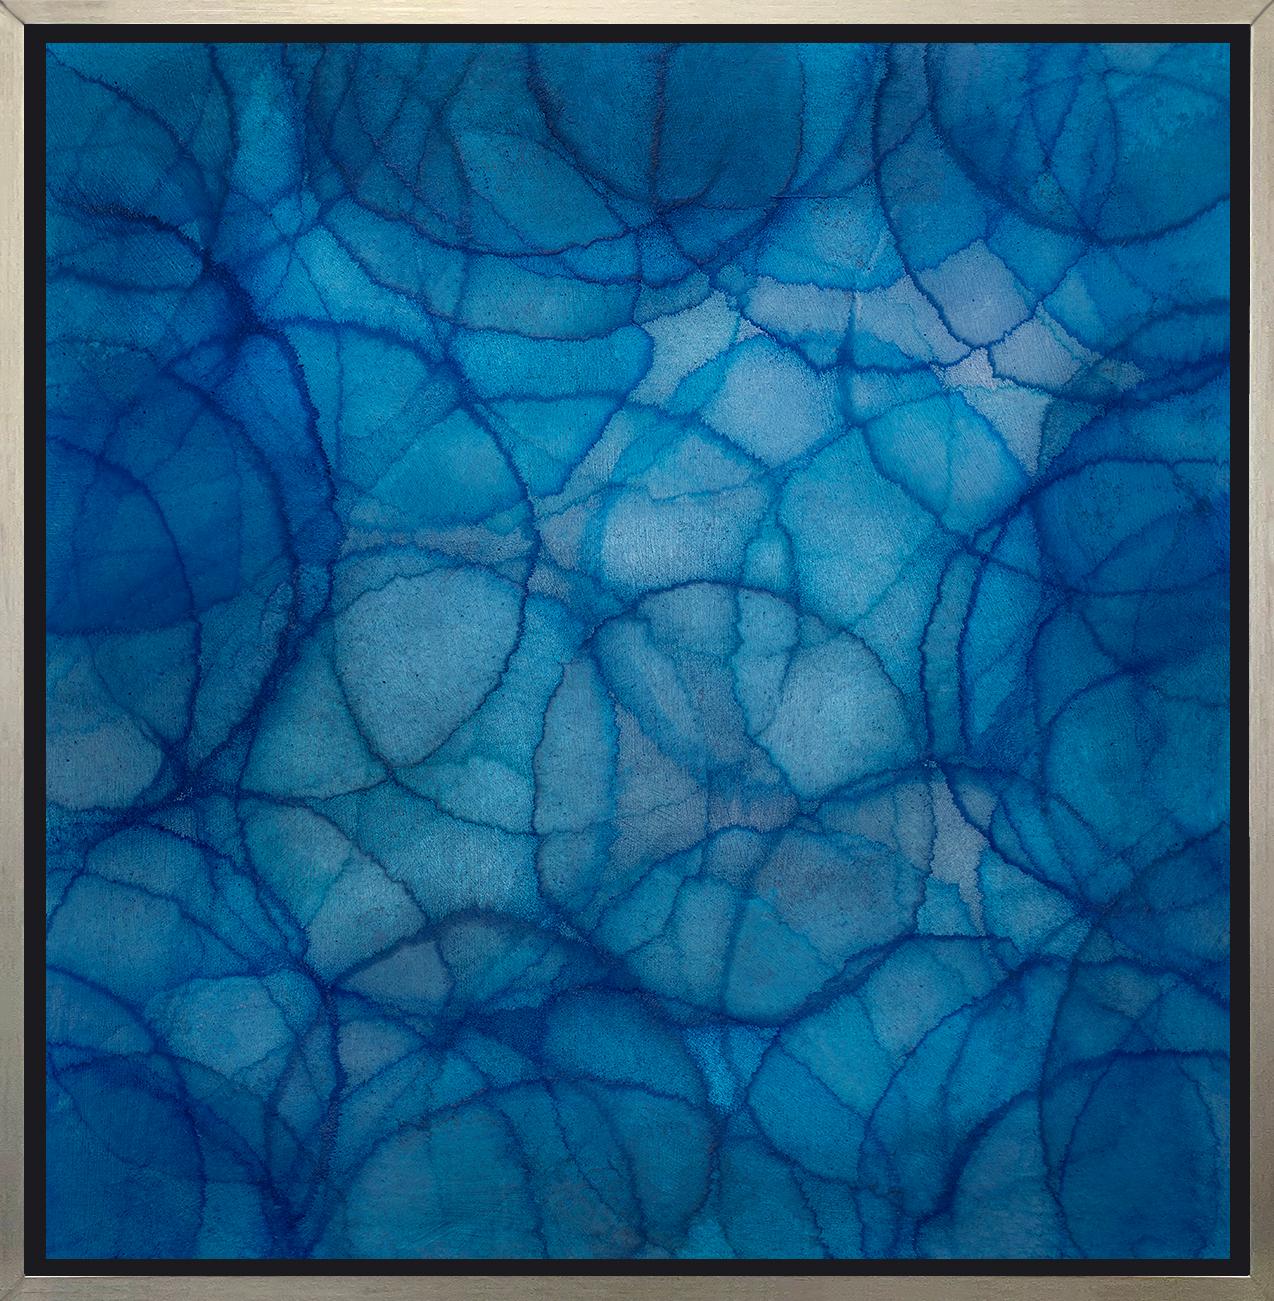 Roger Mudre Abstract Print - "Cineraria, " Framed Limited Edition Giclee Print, 30" x 30"